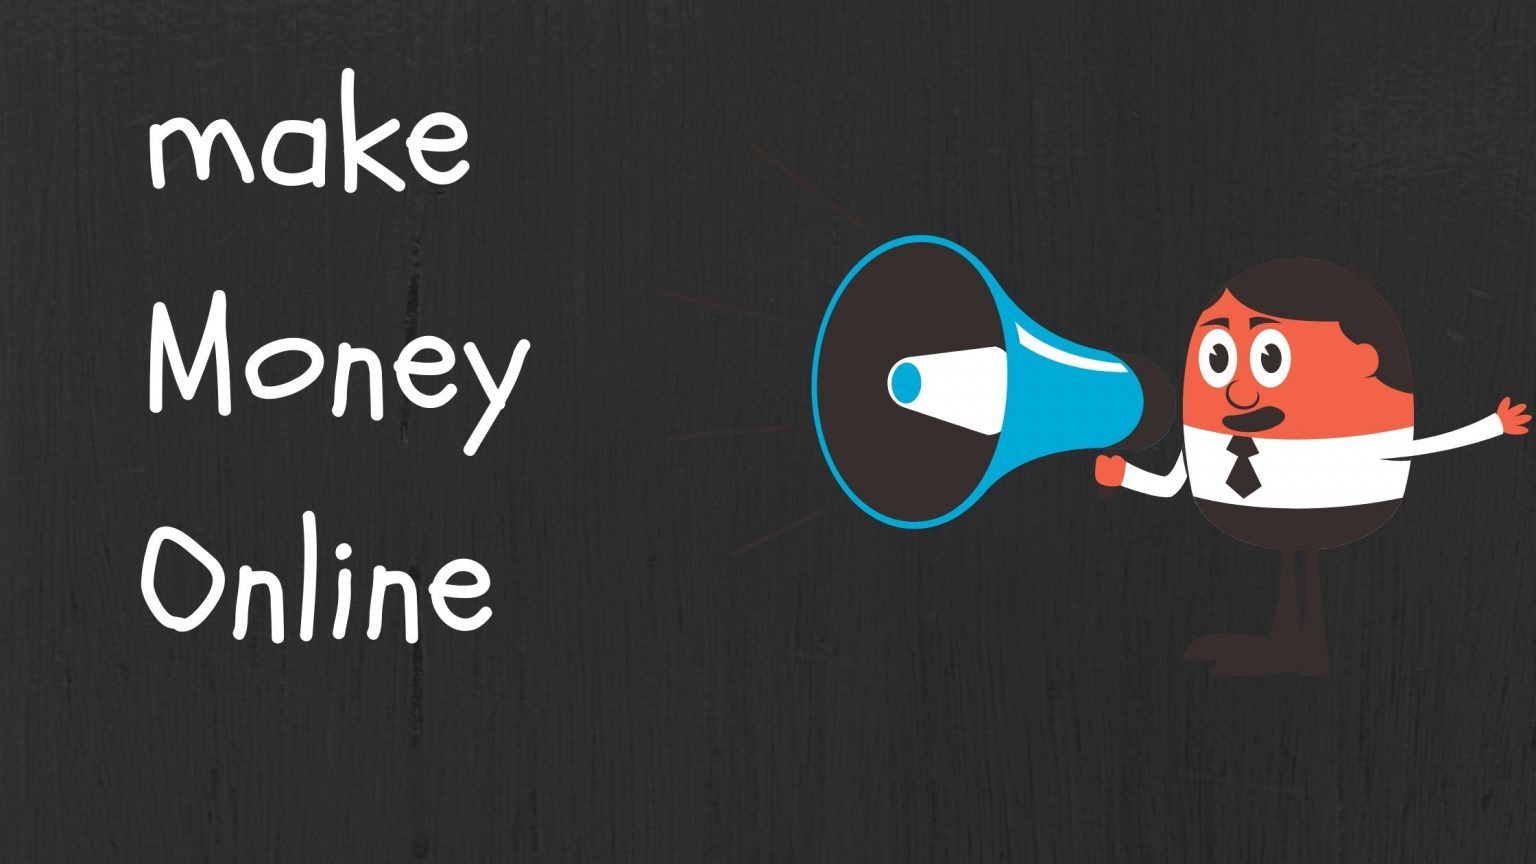 how to make money online without paying anything in kenya